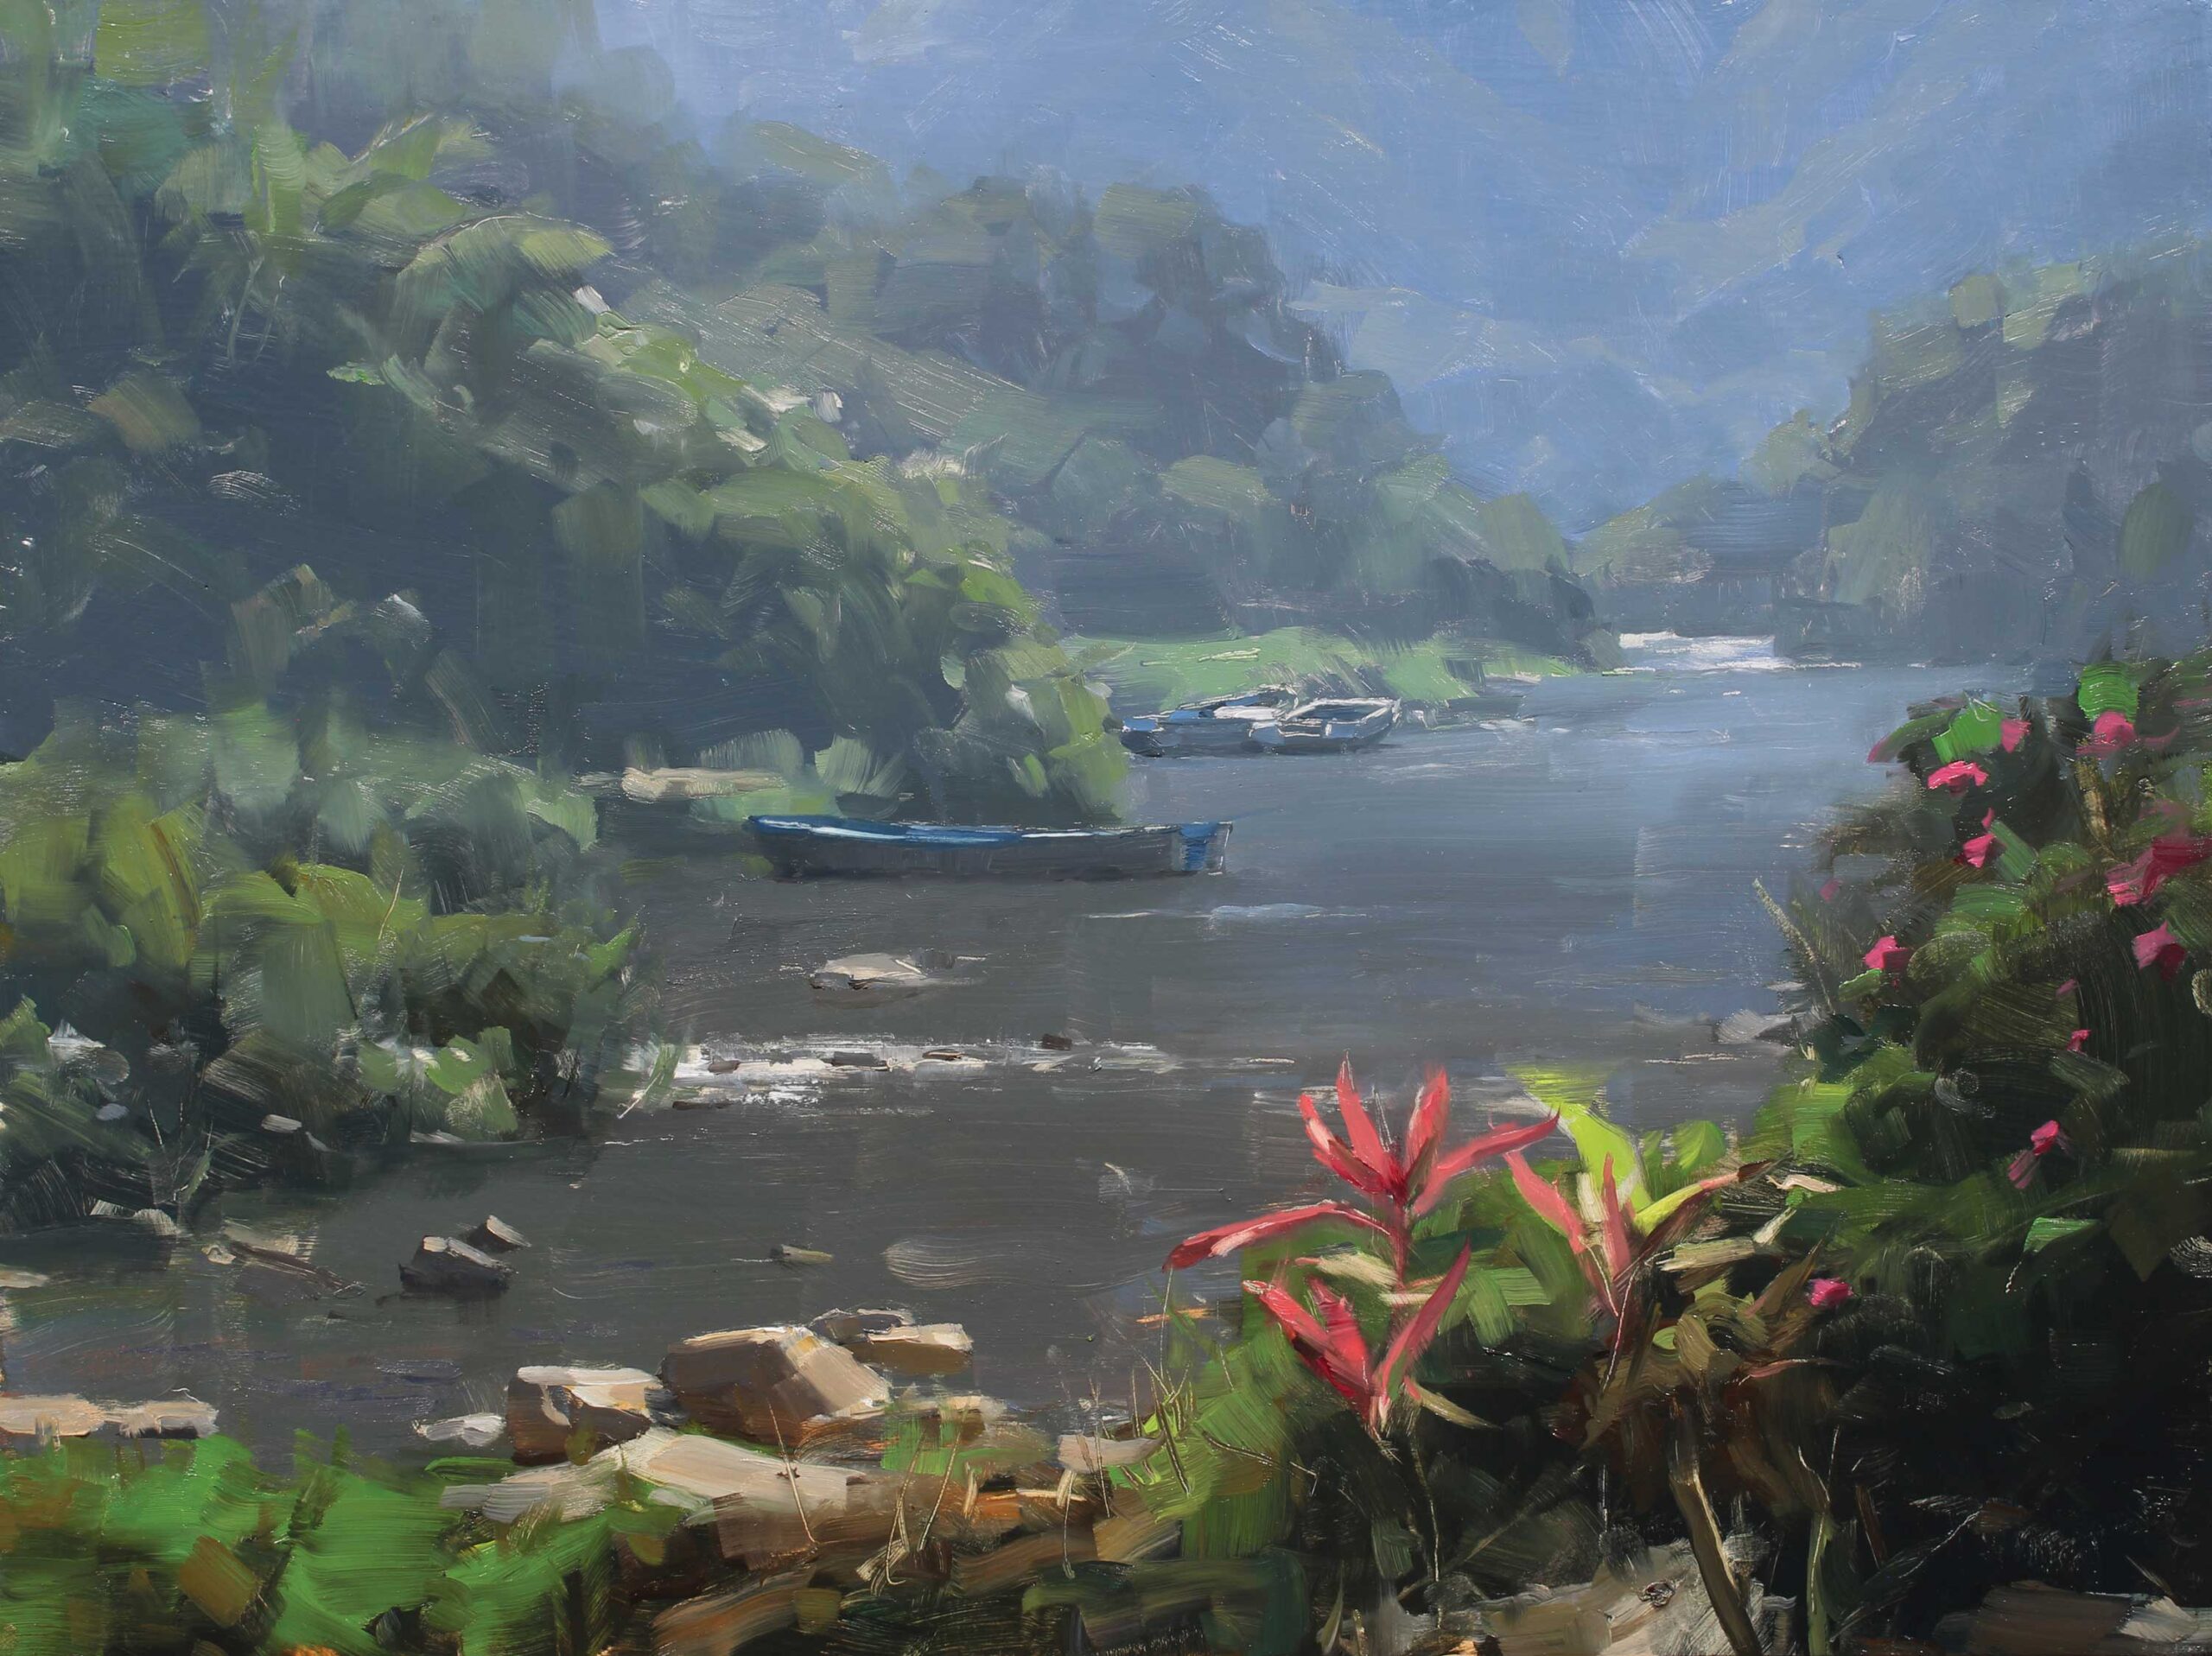 Dave Santillanes, "Up River Study," 2021, oil, 12 x 16 in., collection the artist, studio